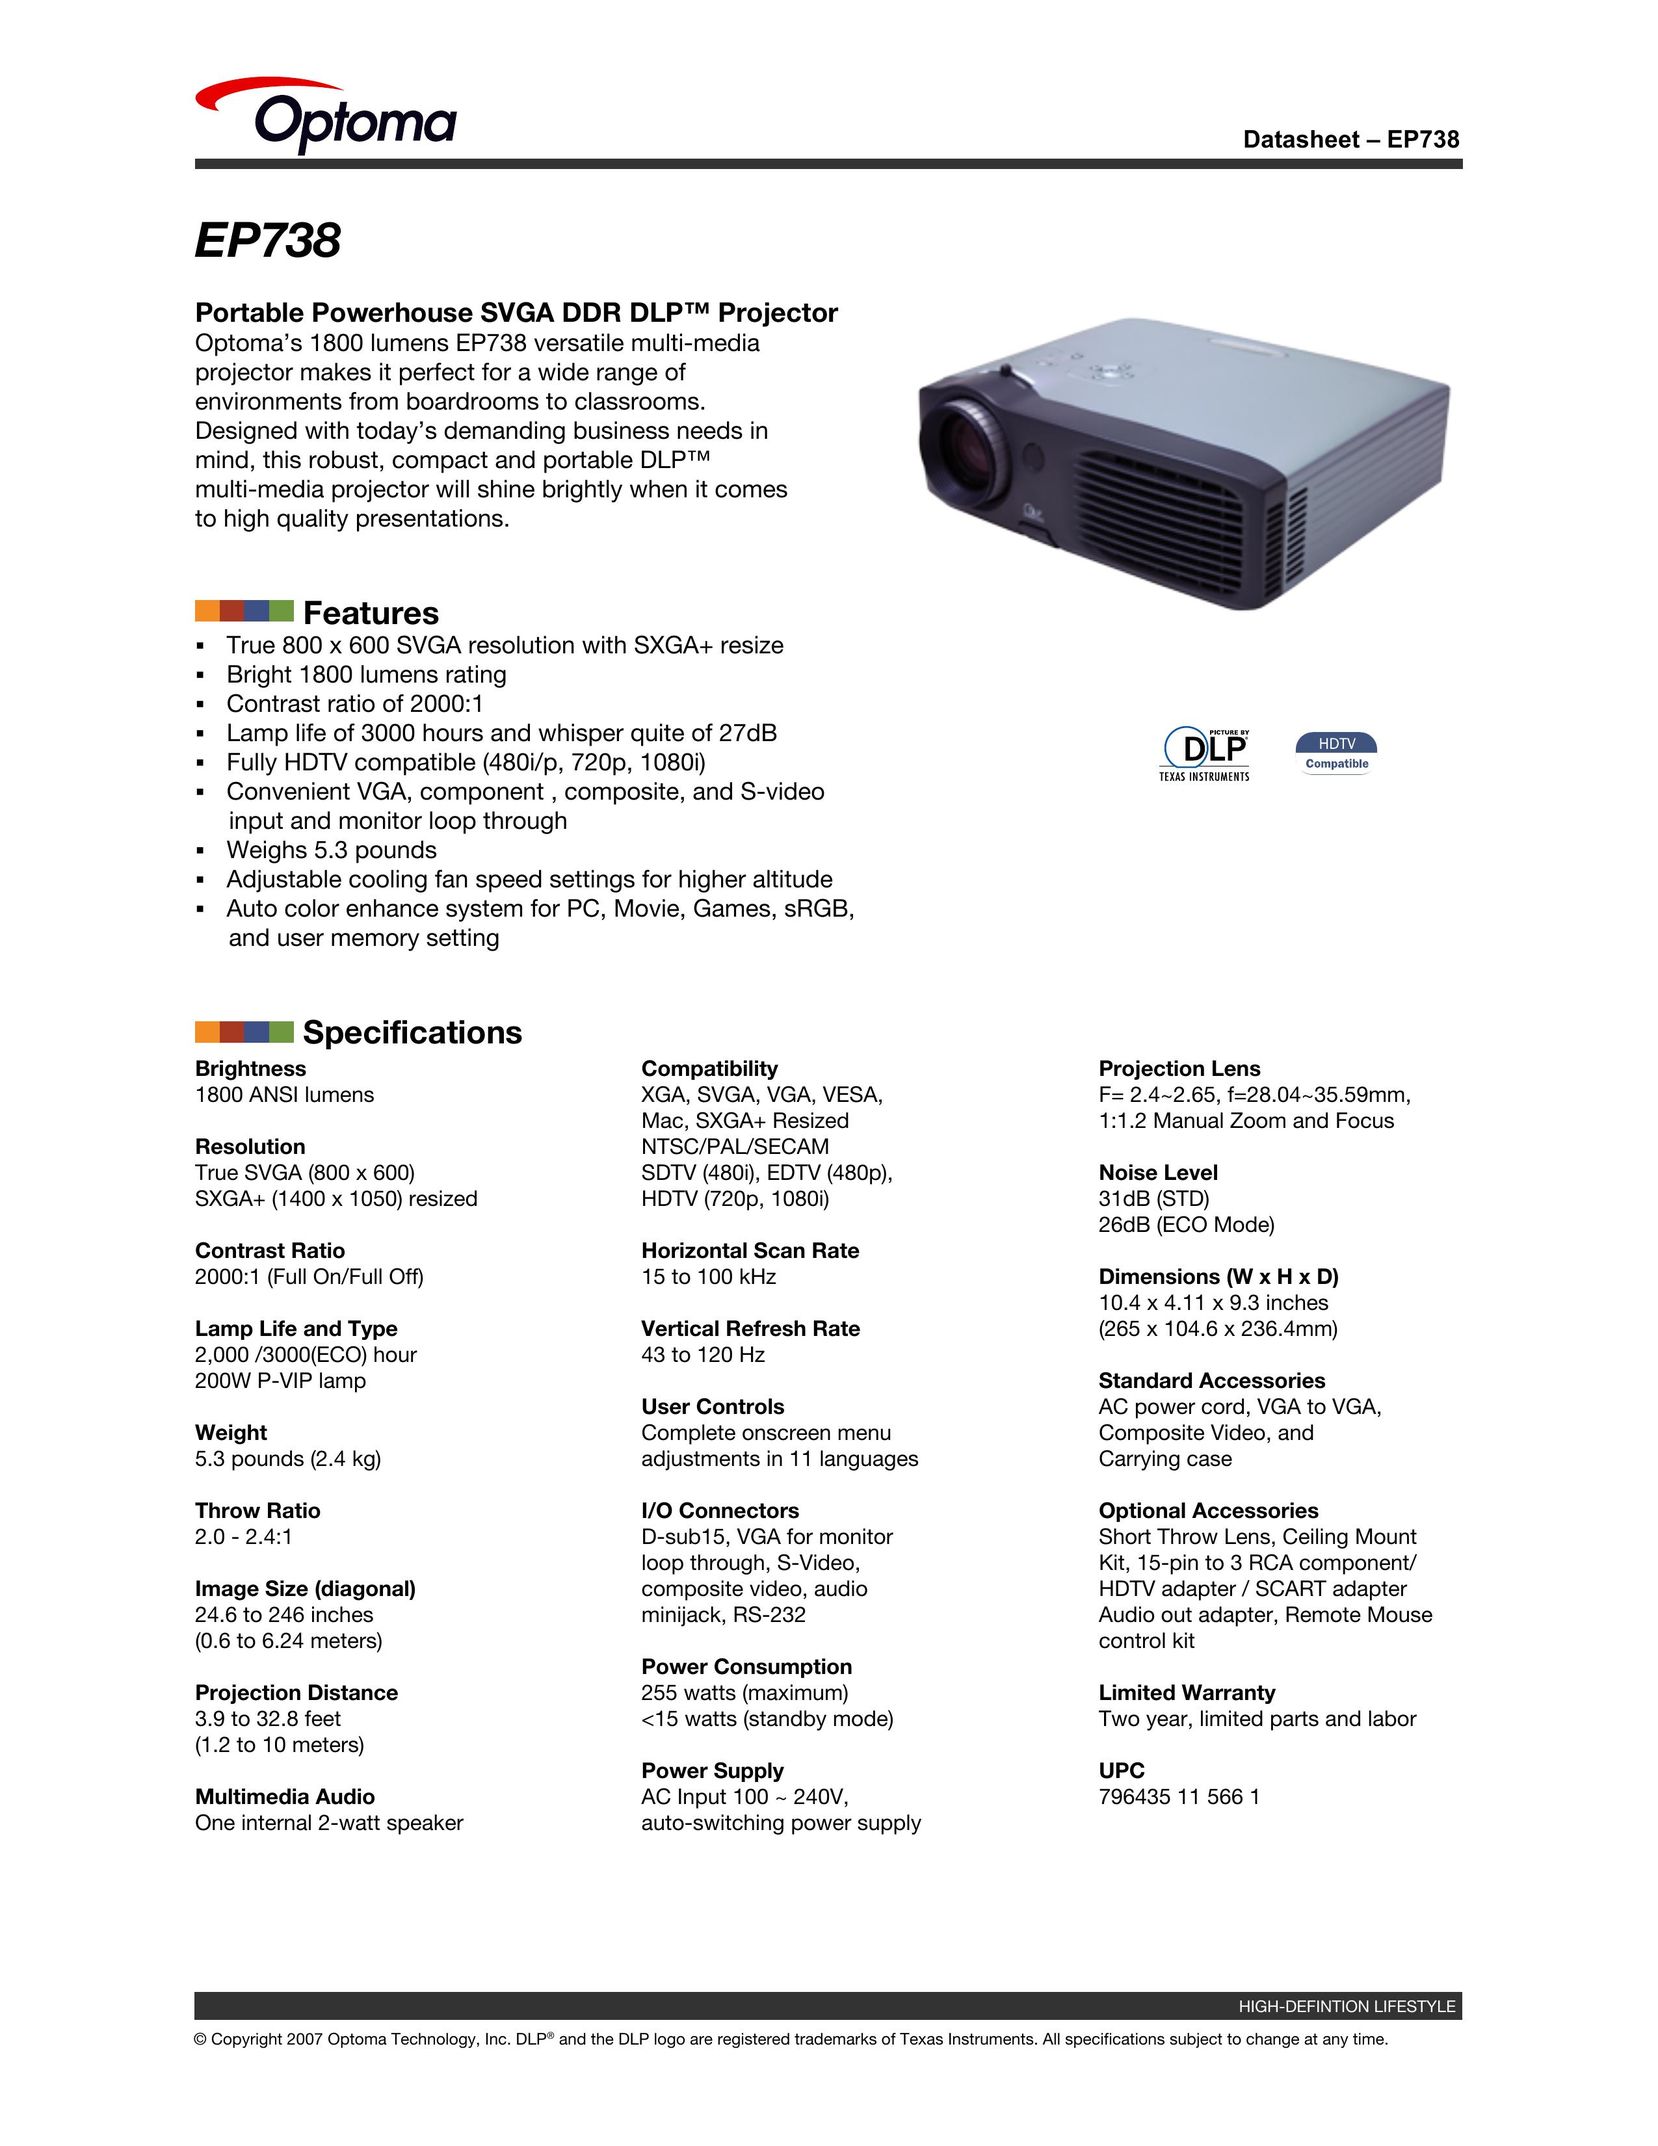 Optoma Technology EP738 Projector User Manual